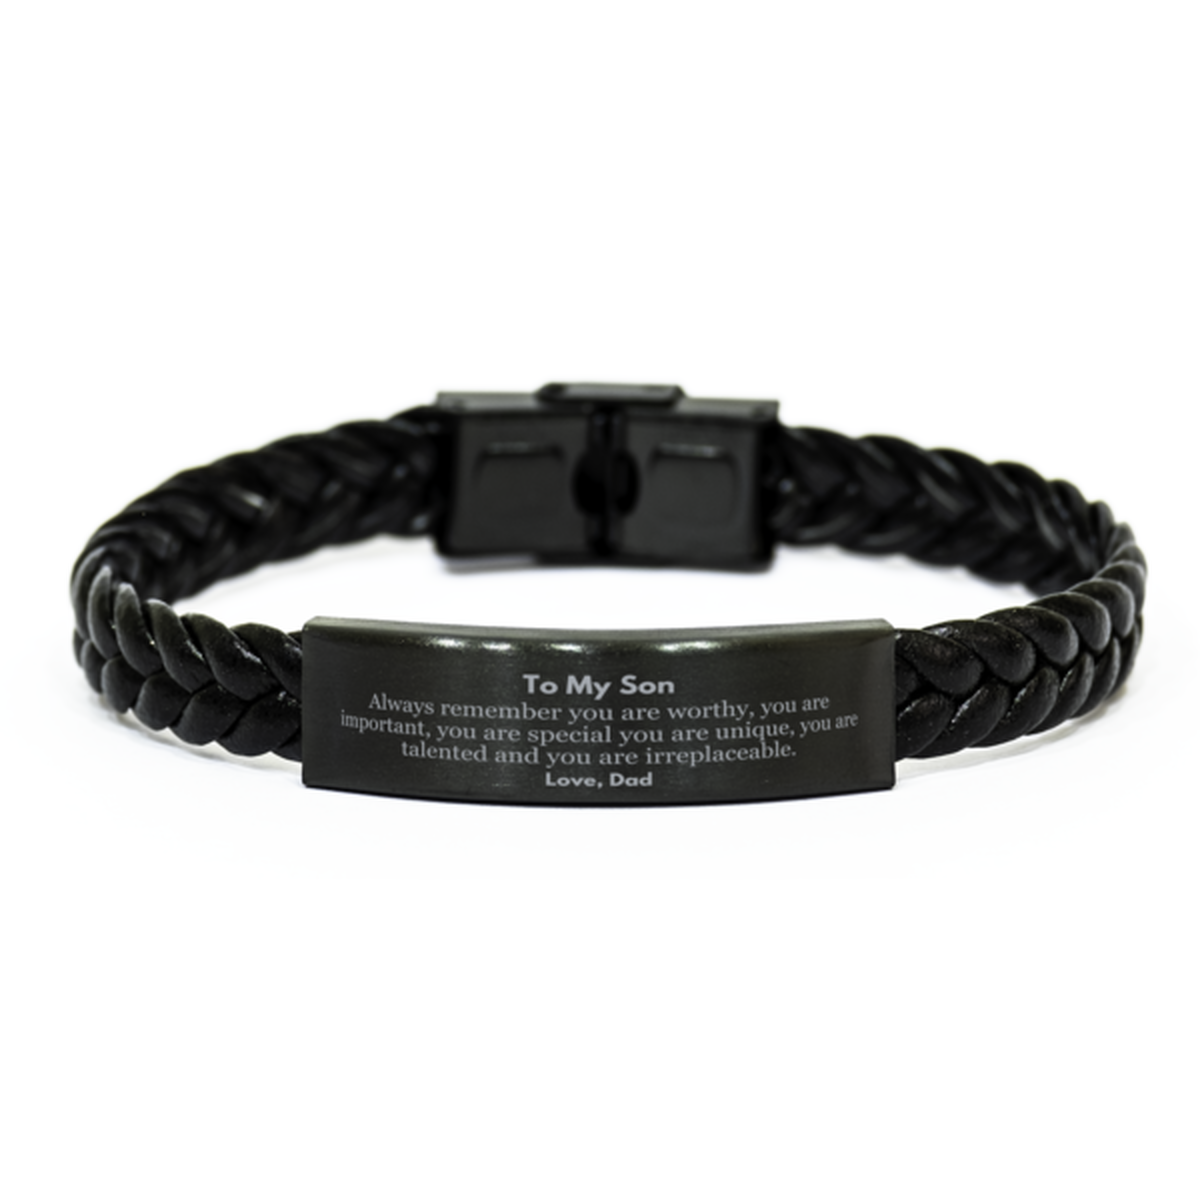 Son Birthday Gifts from Dad, Inspirational Braided Leather Bracelet for Son Christmas Graduation Gifts for Son Always remember you are worthy, you are important. Love, Dad